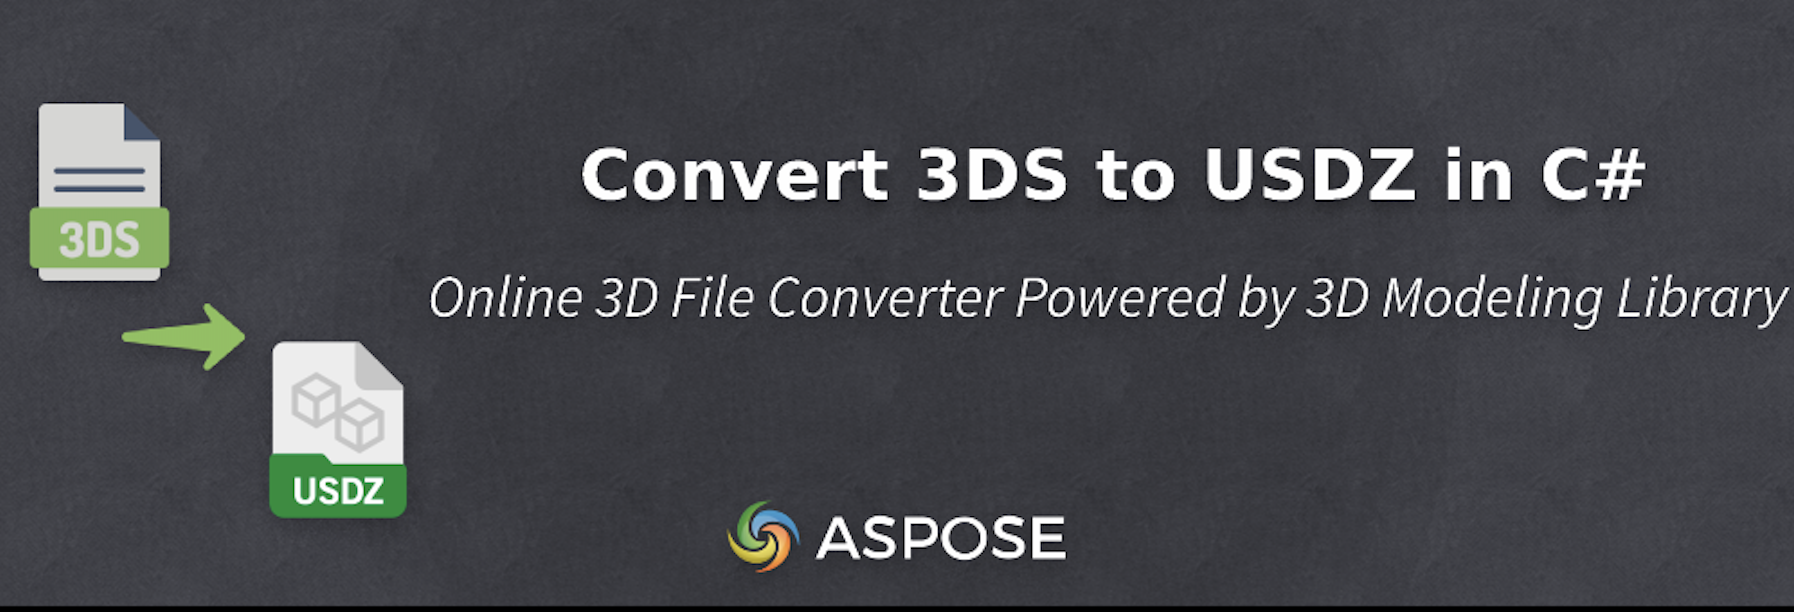 Convert 3DS to USDZ in C# using 3D Modeling Library